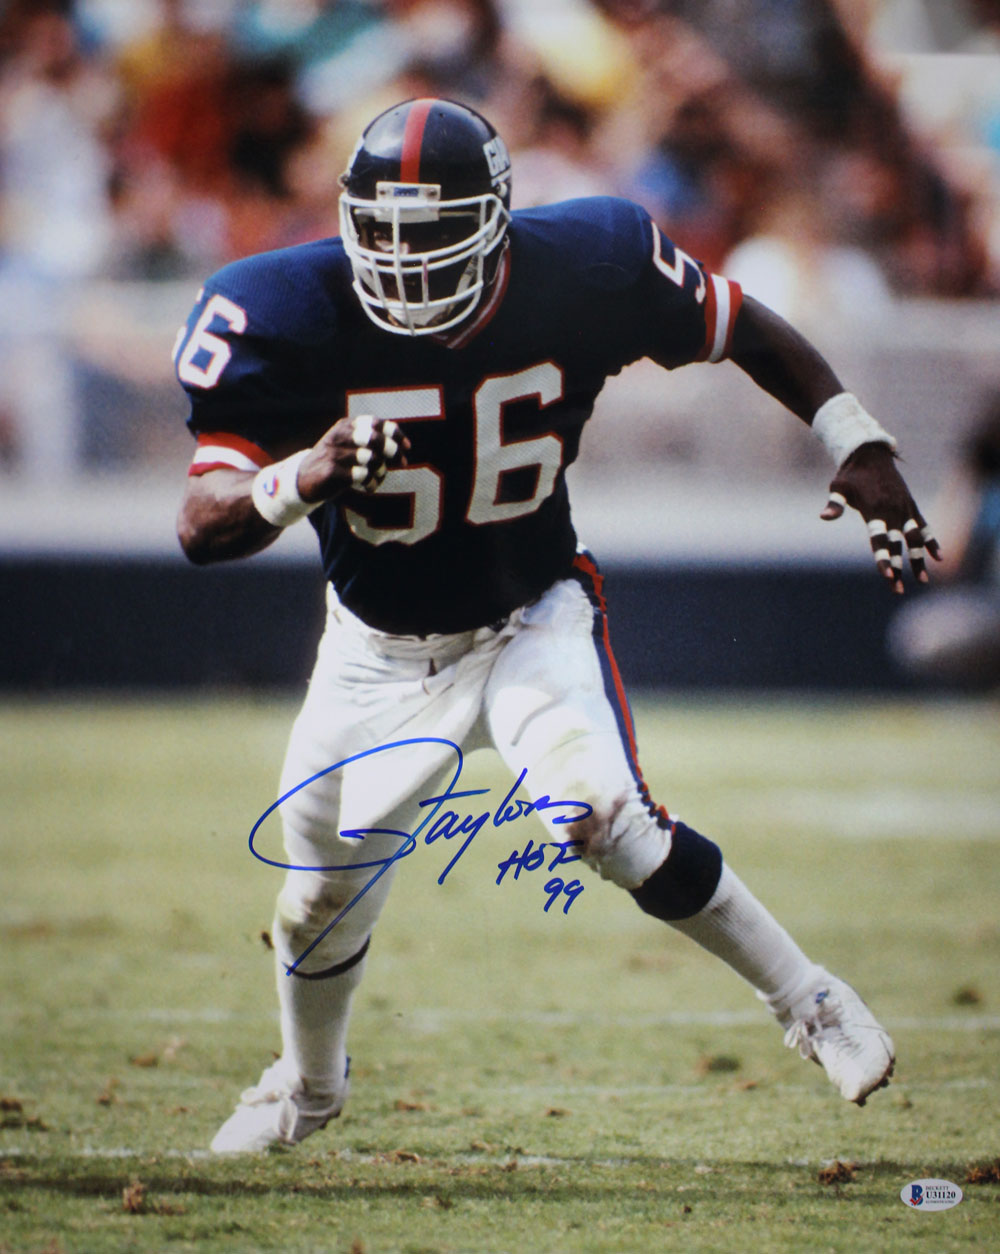 Lawrence Taylor Autographed/Signed New York Giants 16x20 Photo HOF BAS 29268